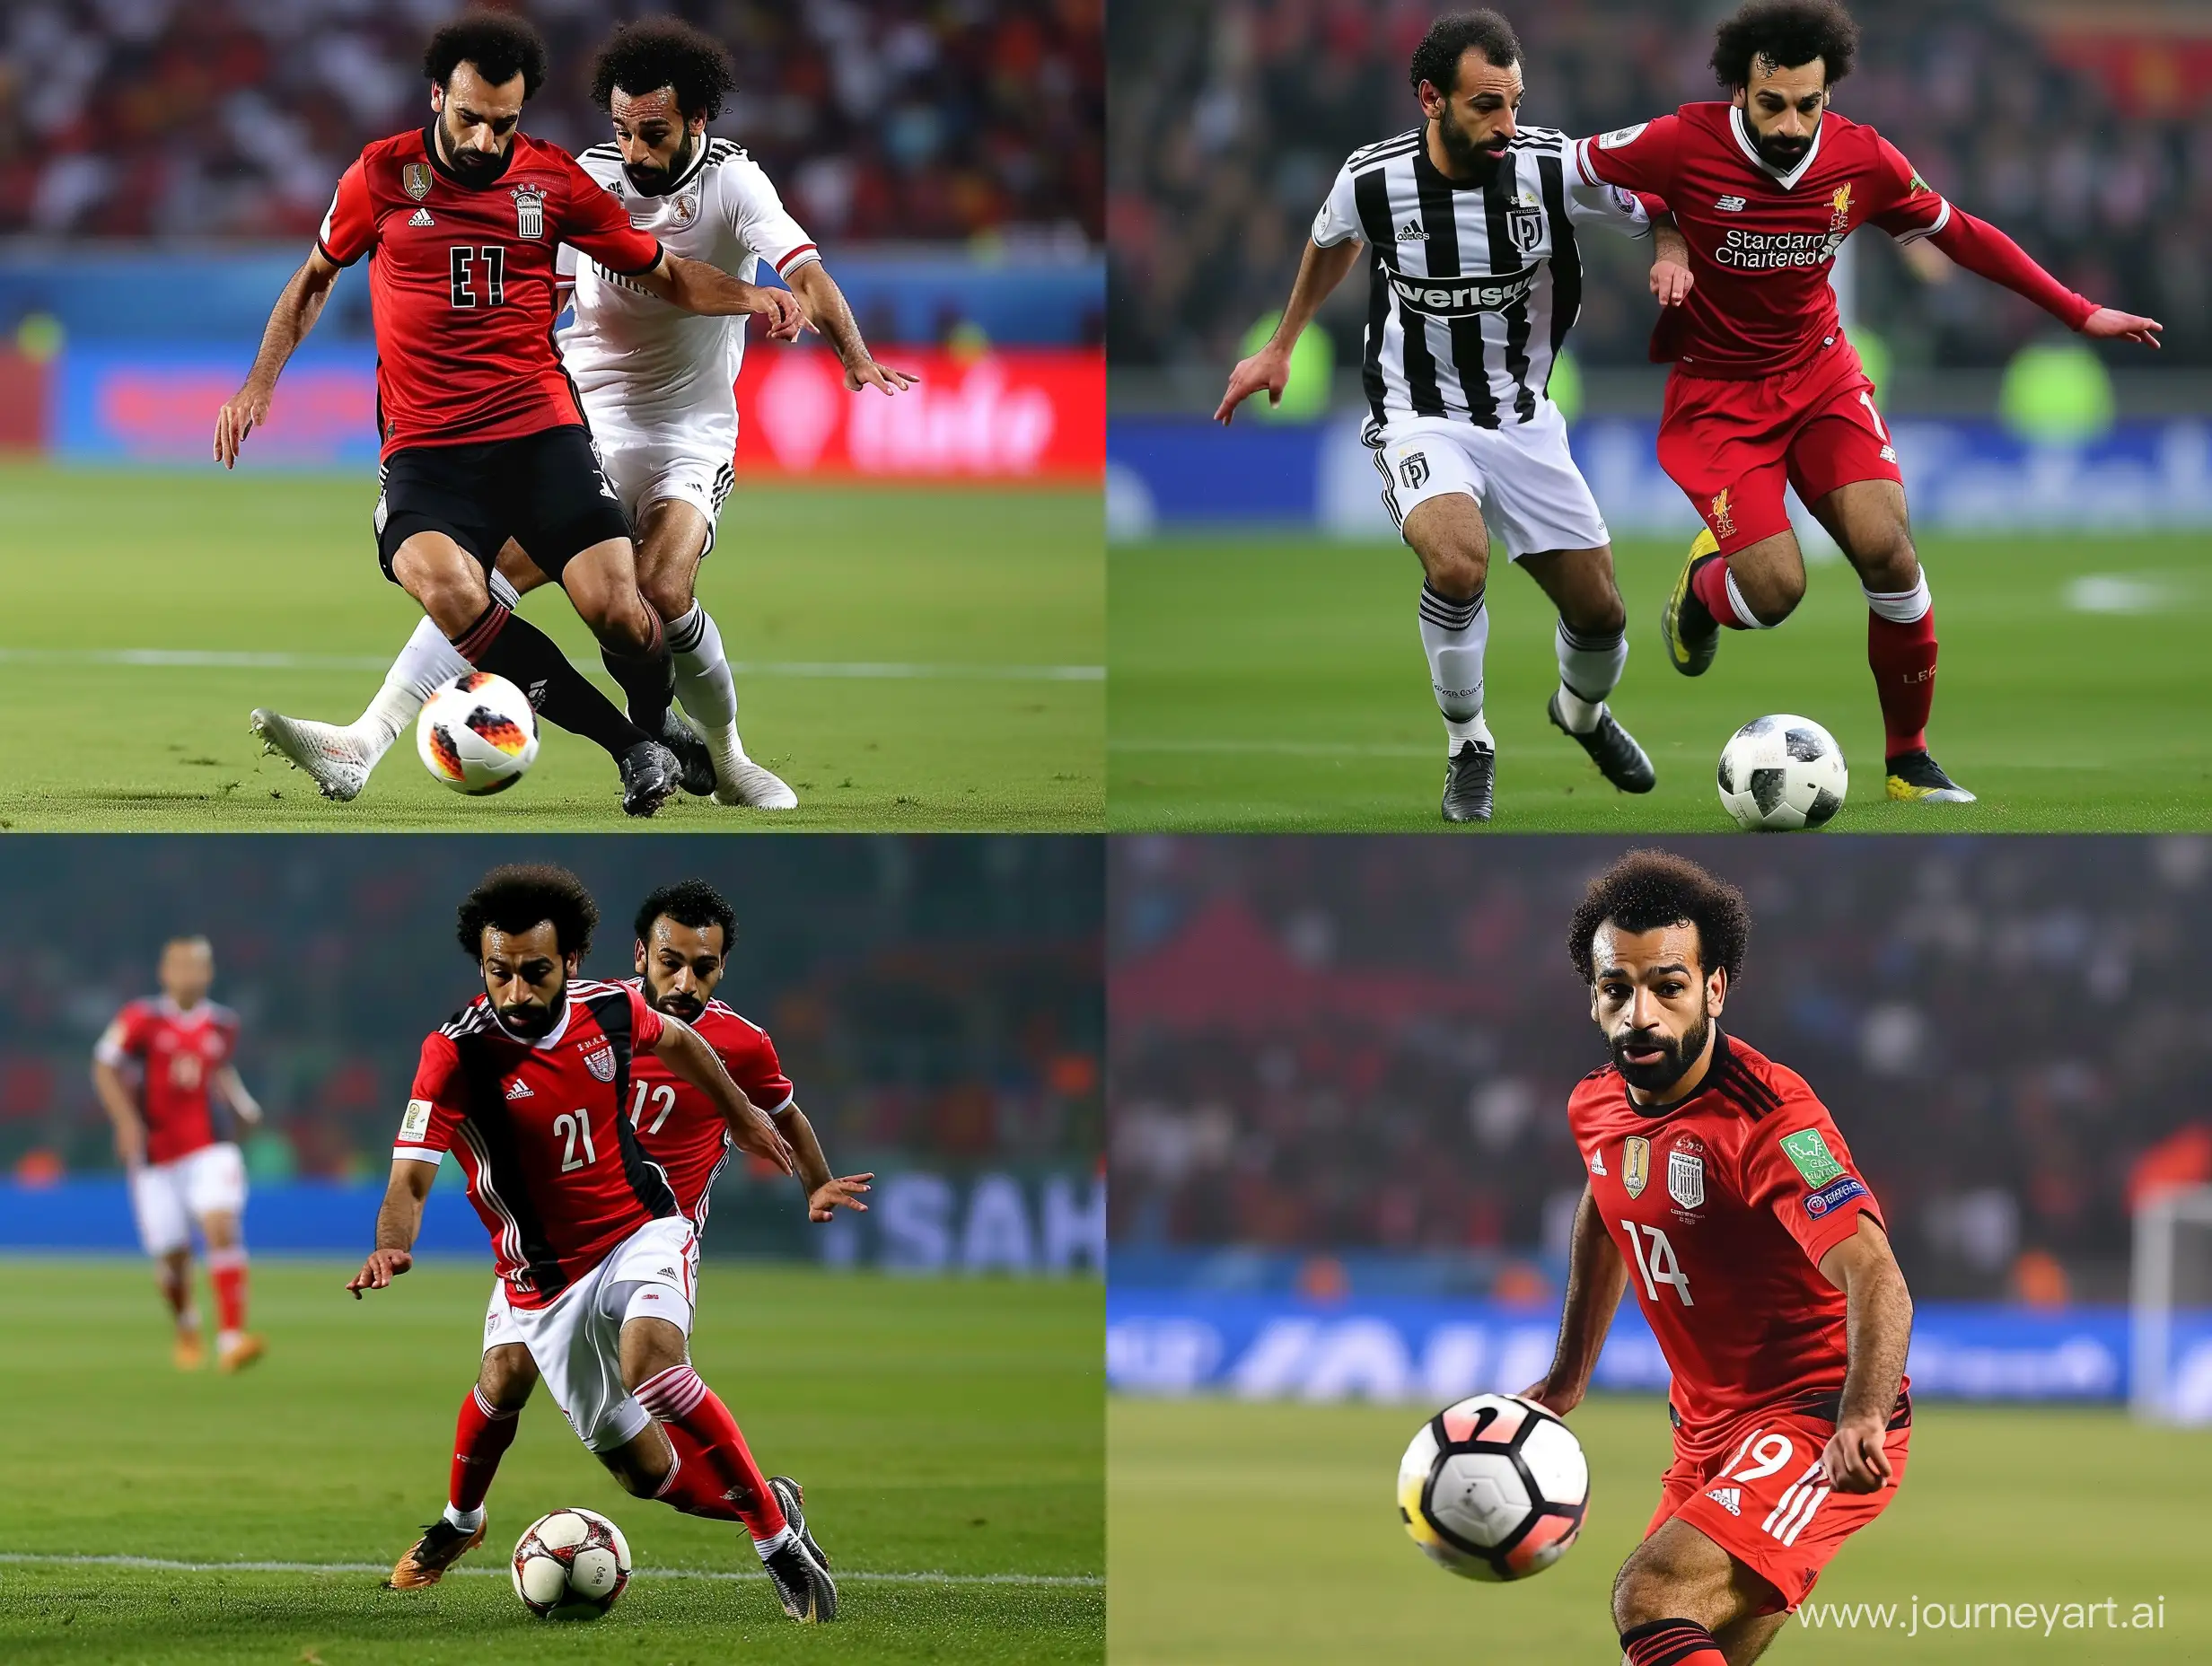 Abdel-Fattah-elSisi-and-Mohamed-Salah-Engage-in-Football-Match